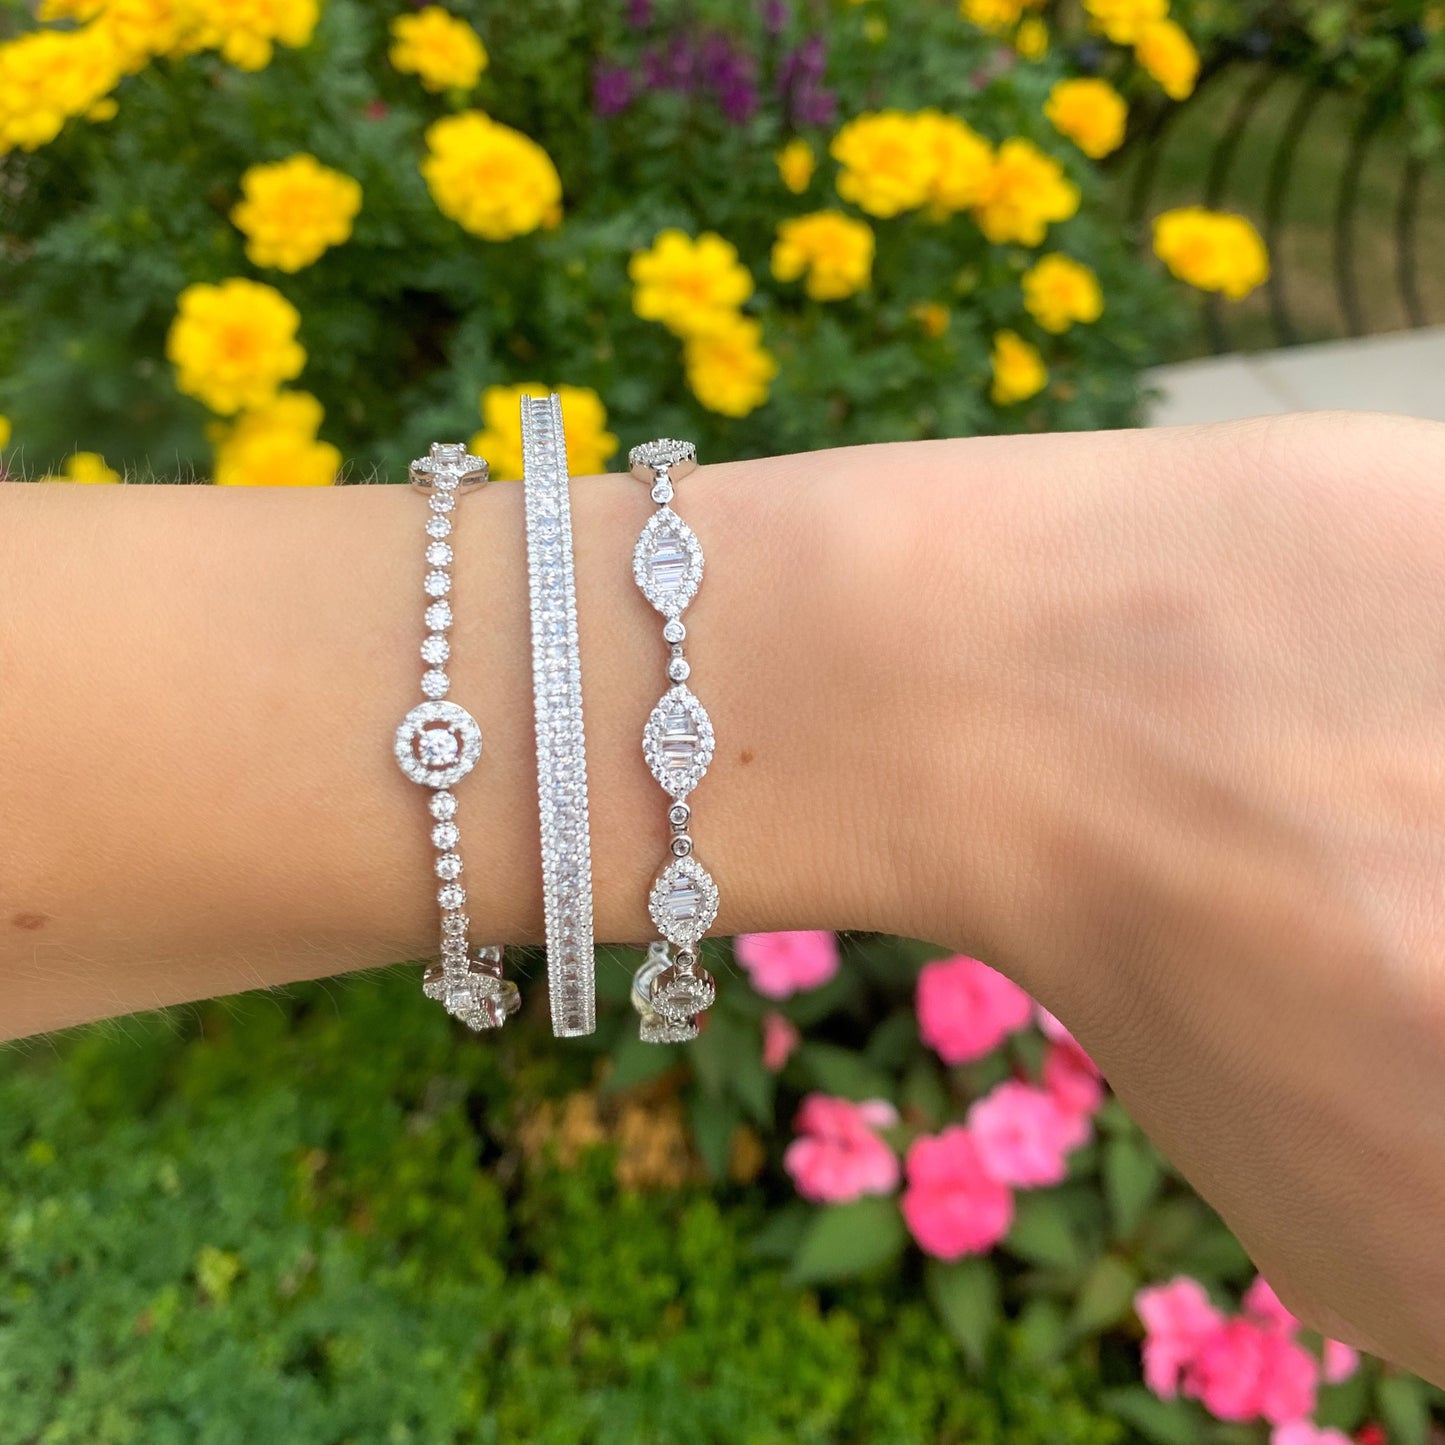 Sterling Silver and CZ Bridal Tennis Bracelets from Alexandra Marks Jewelry